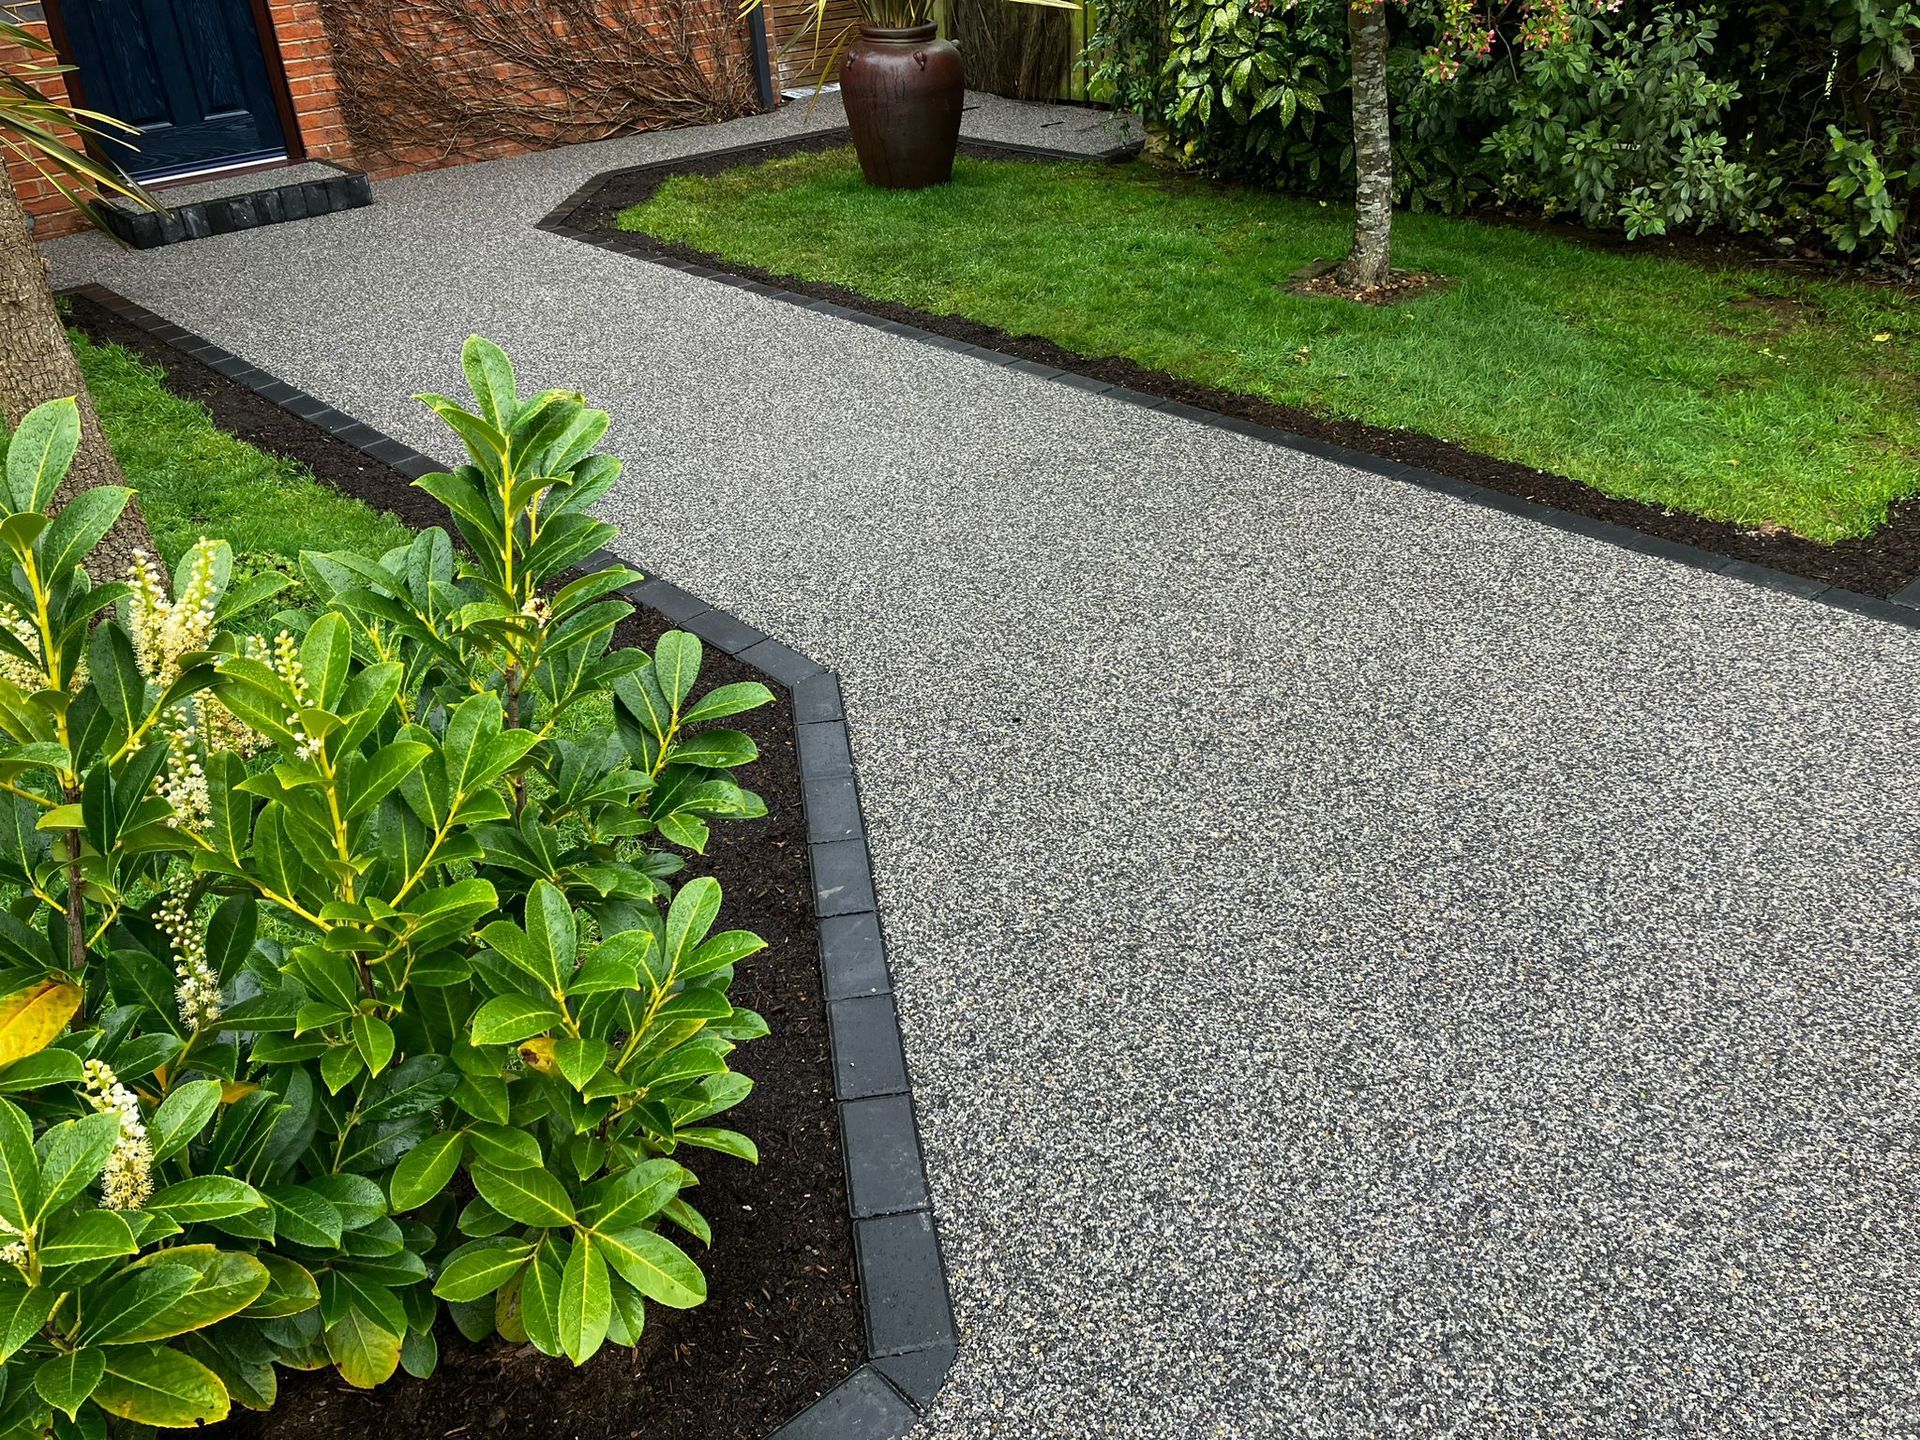 Grey resin driveway surrounded by dark block paving with green foliage.